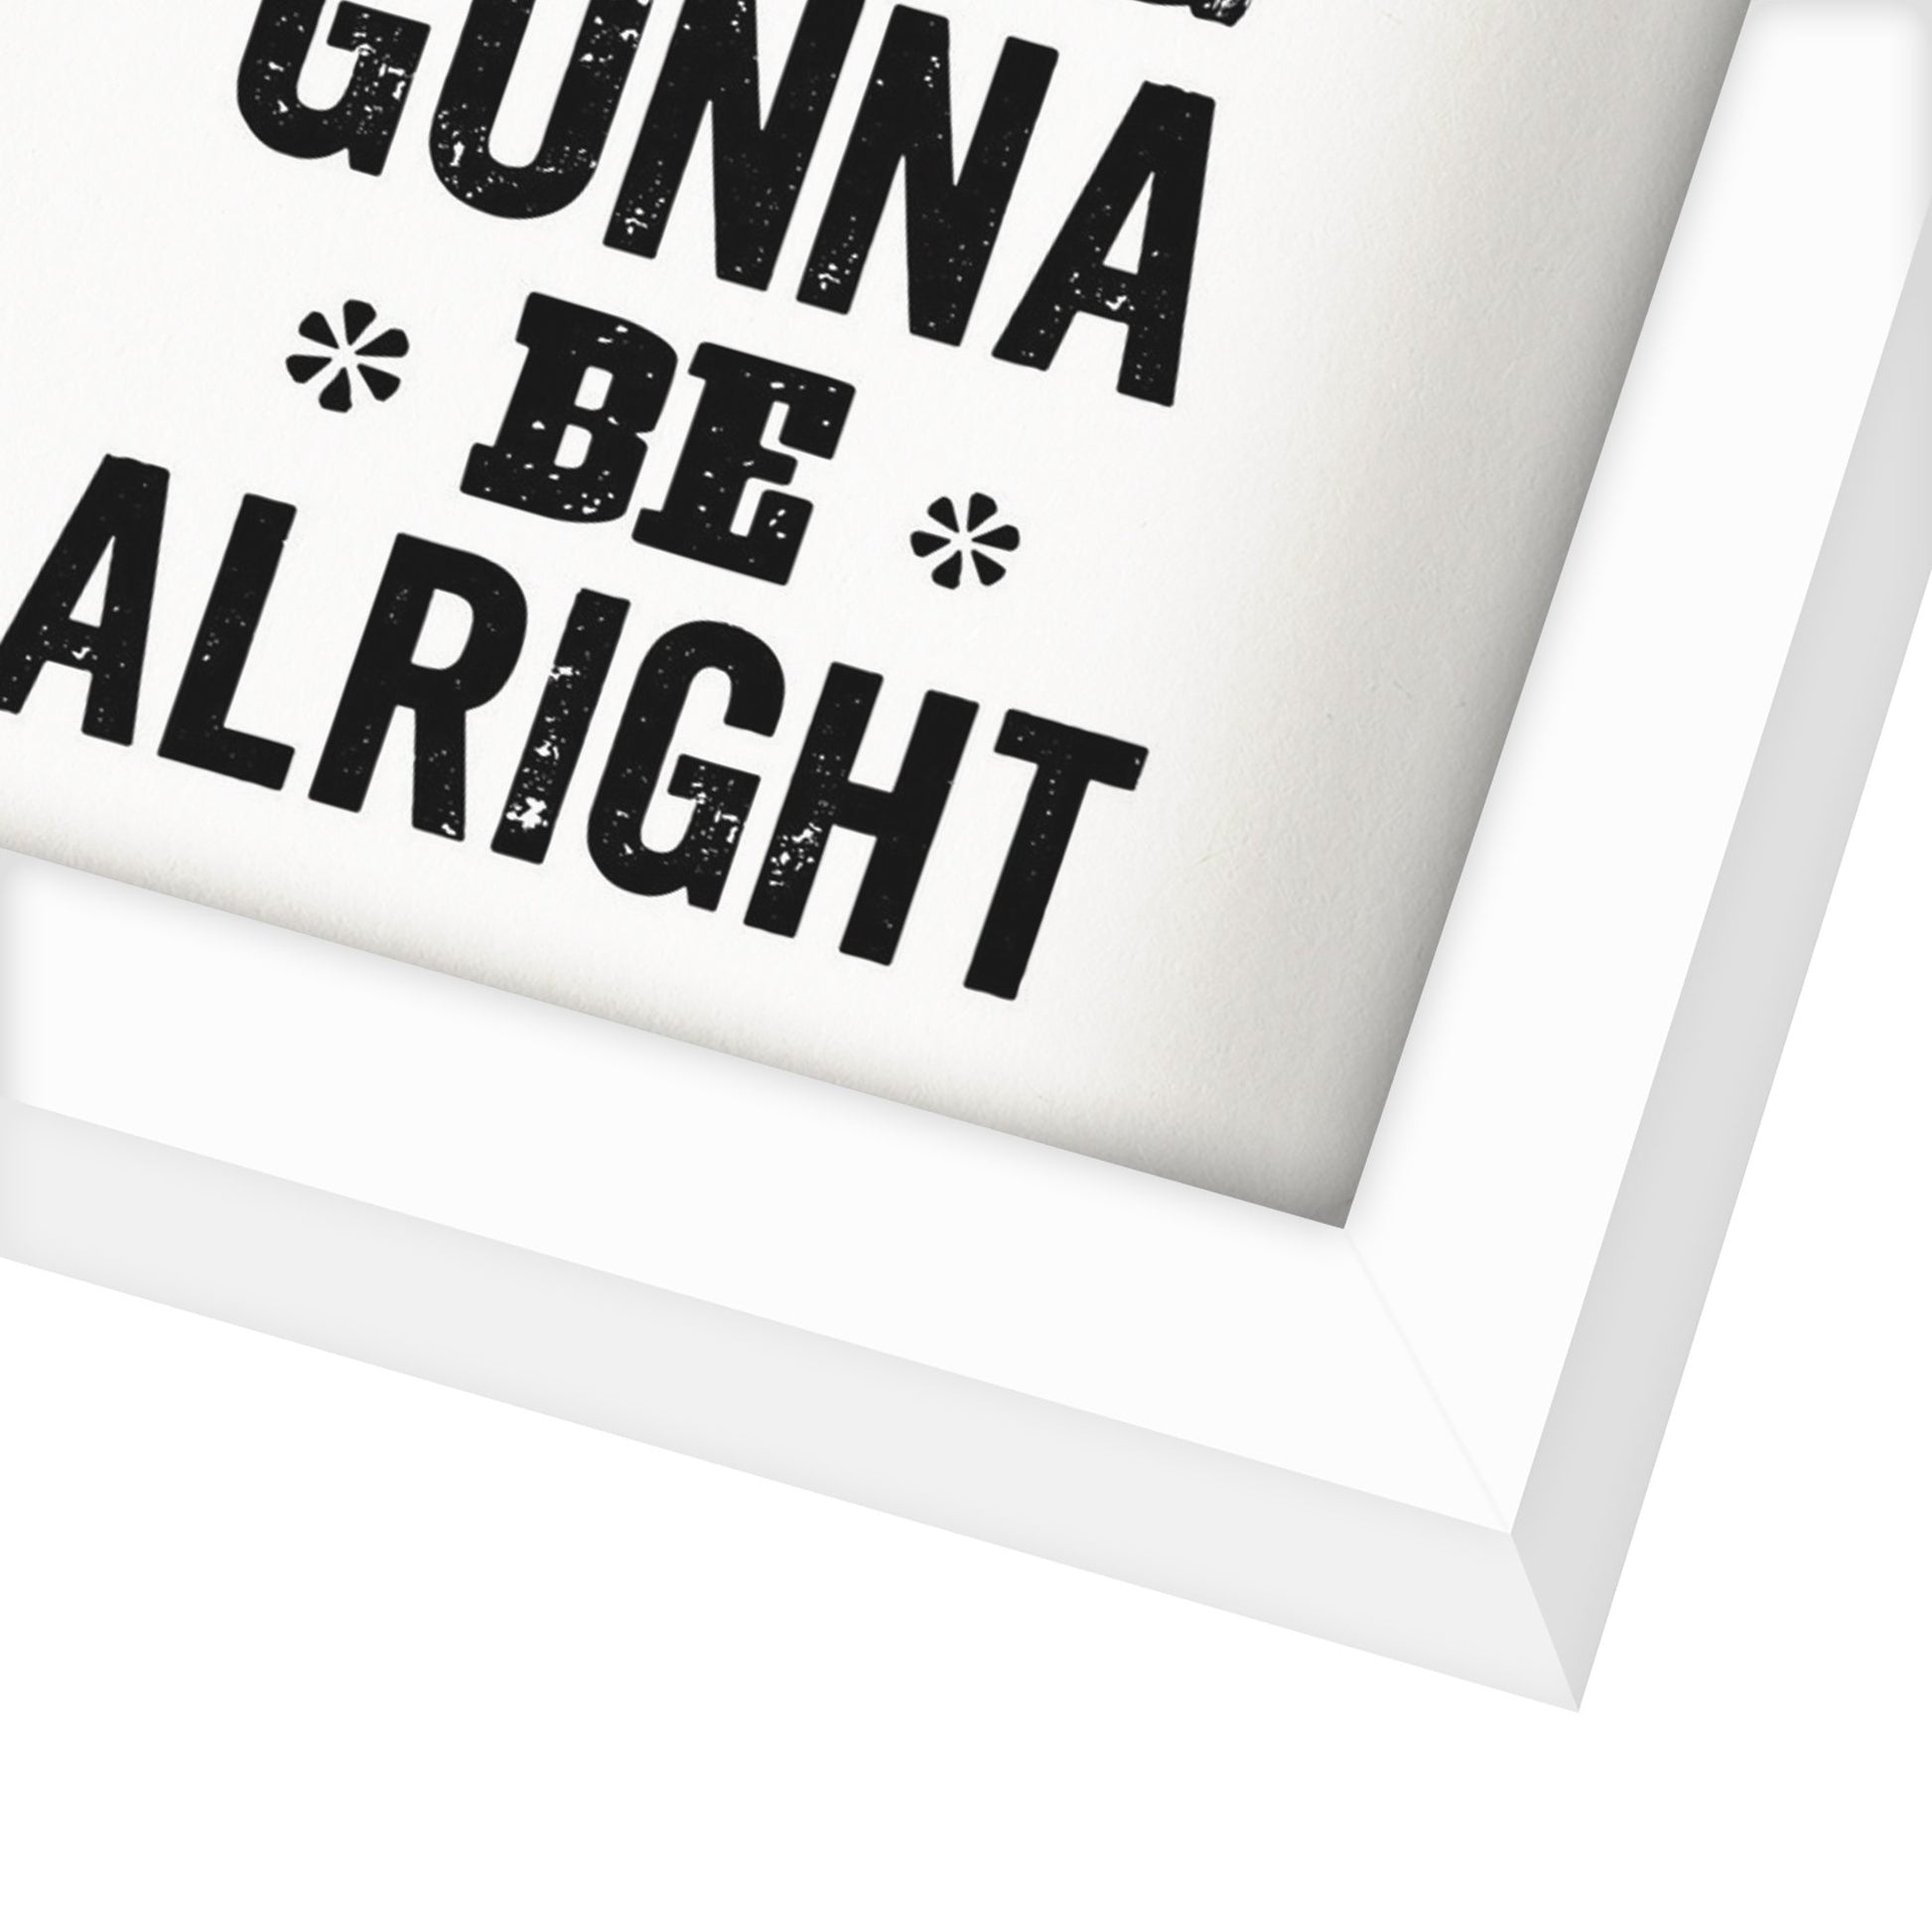 Every Little Thing Is Gonna Be Alright By Motivated Type - Shadow Box Framed Art - Americanflat